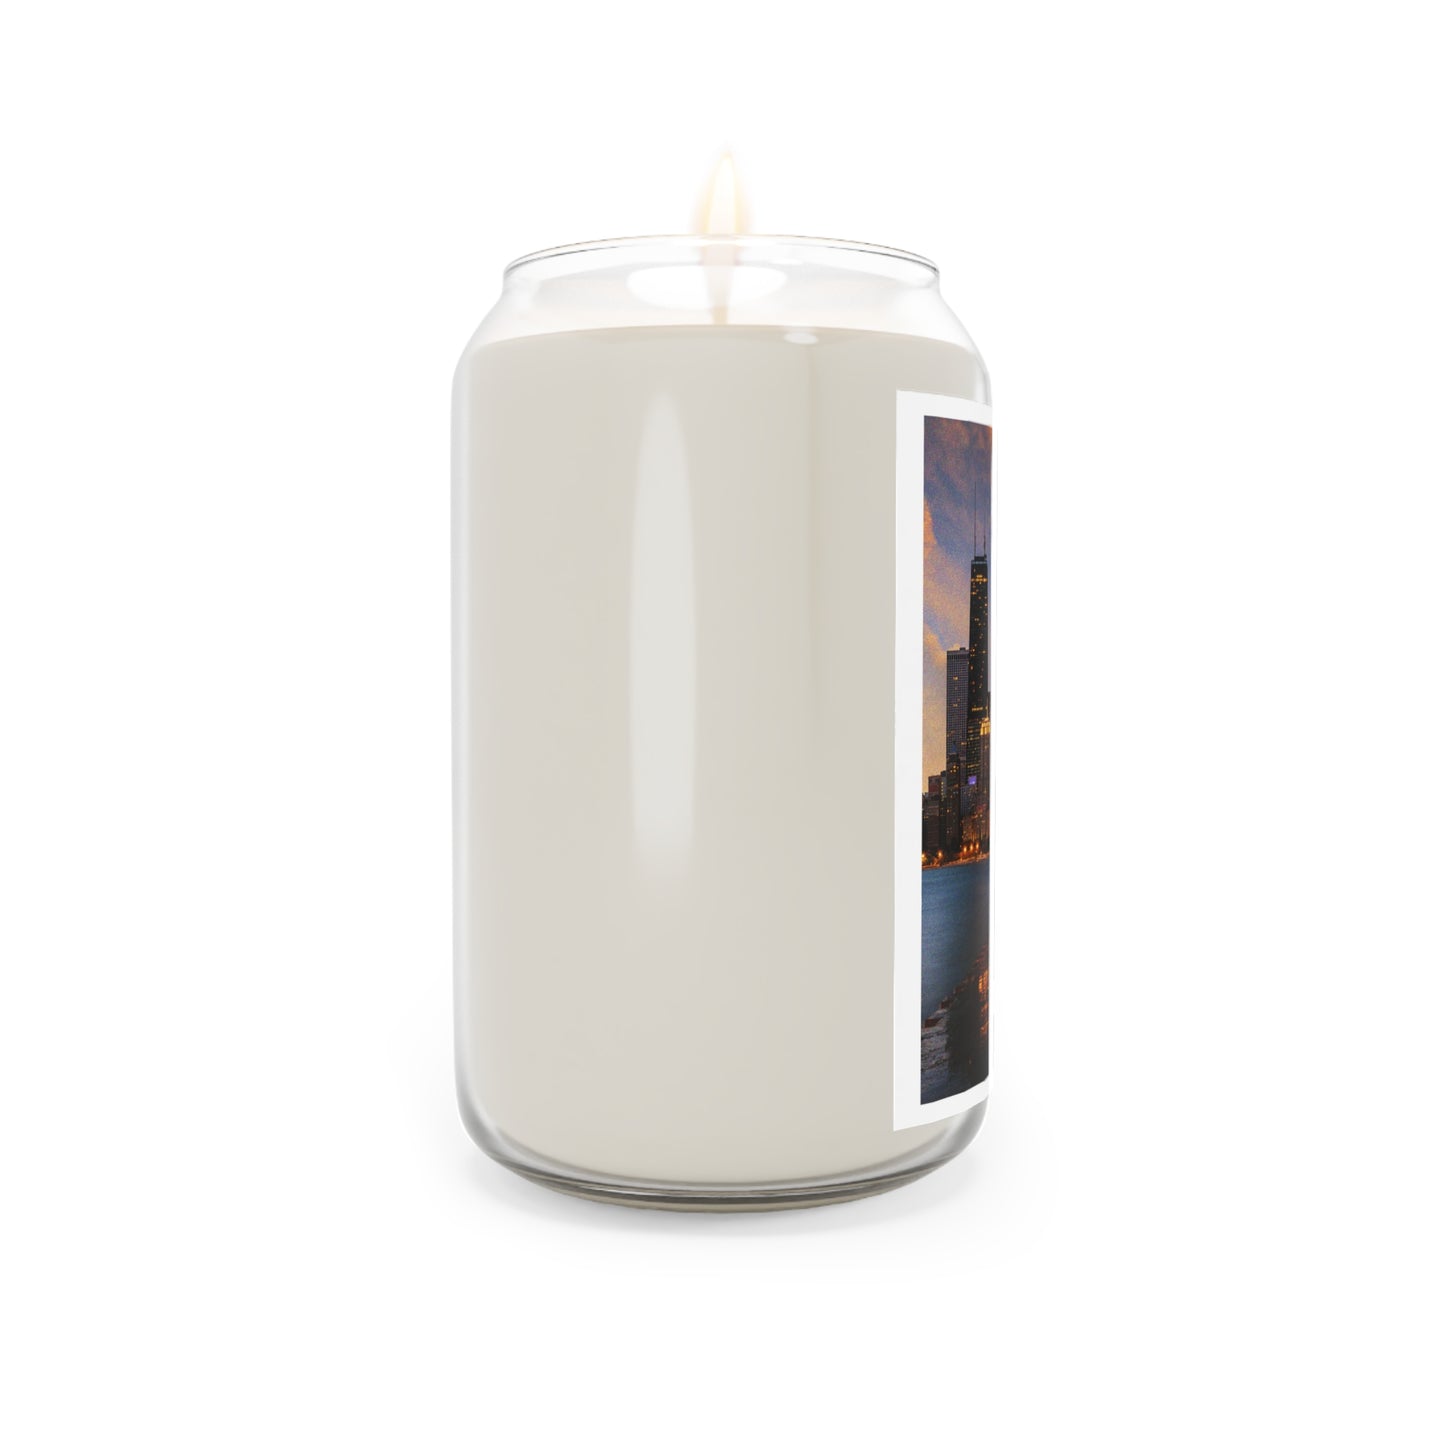 Chicago, Illinois (#016) - Home Town Candles, 13.75oz